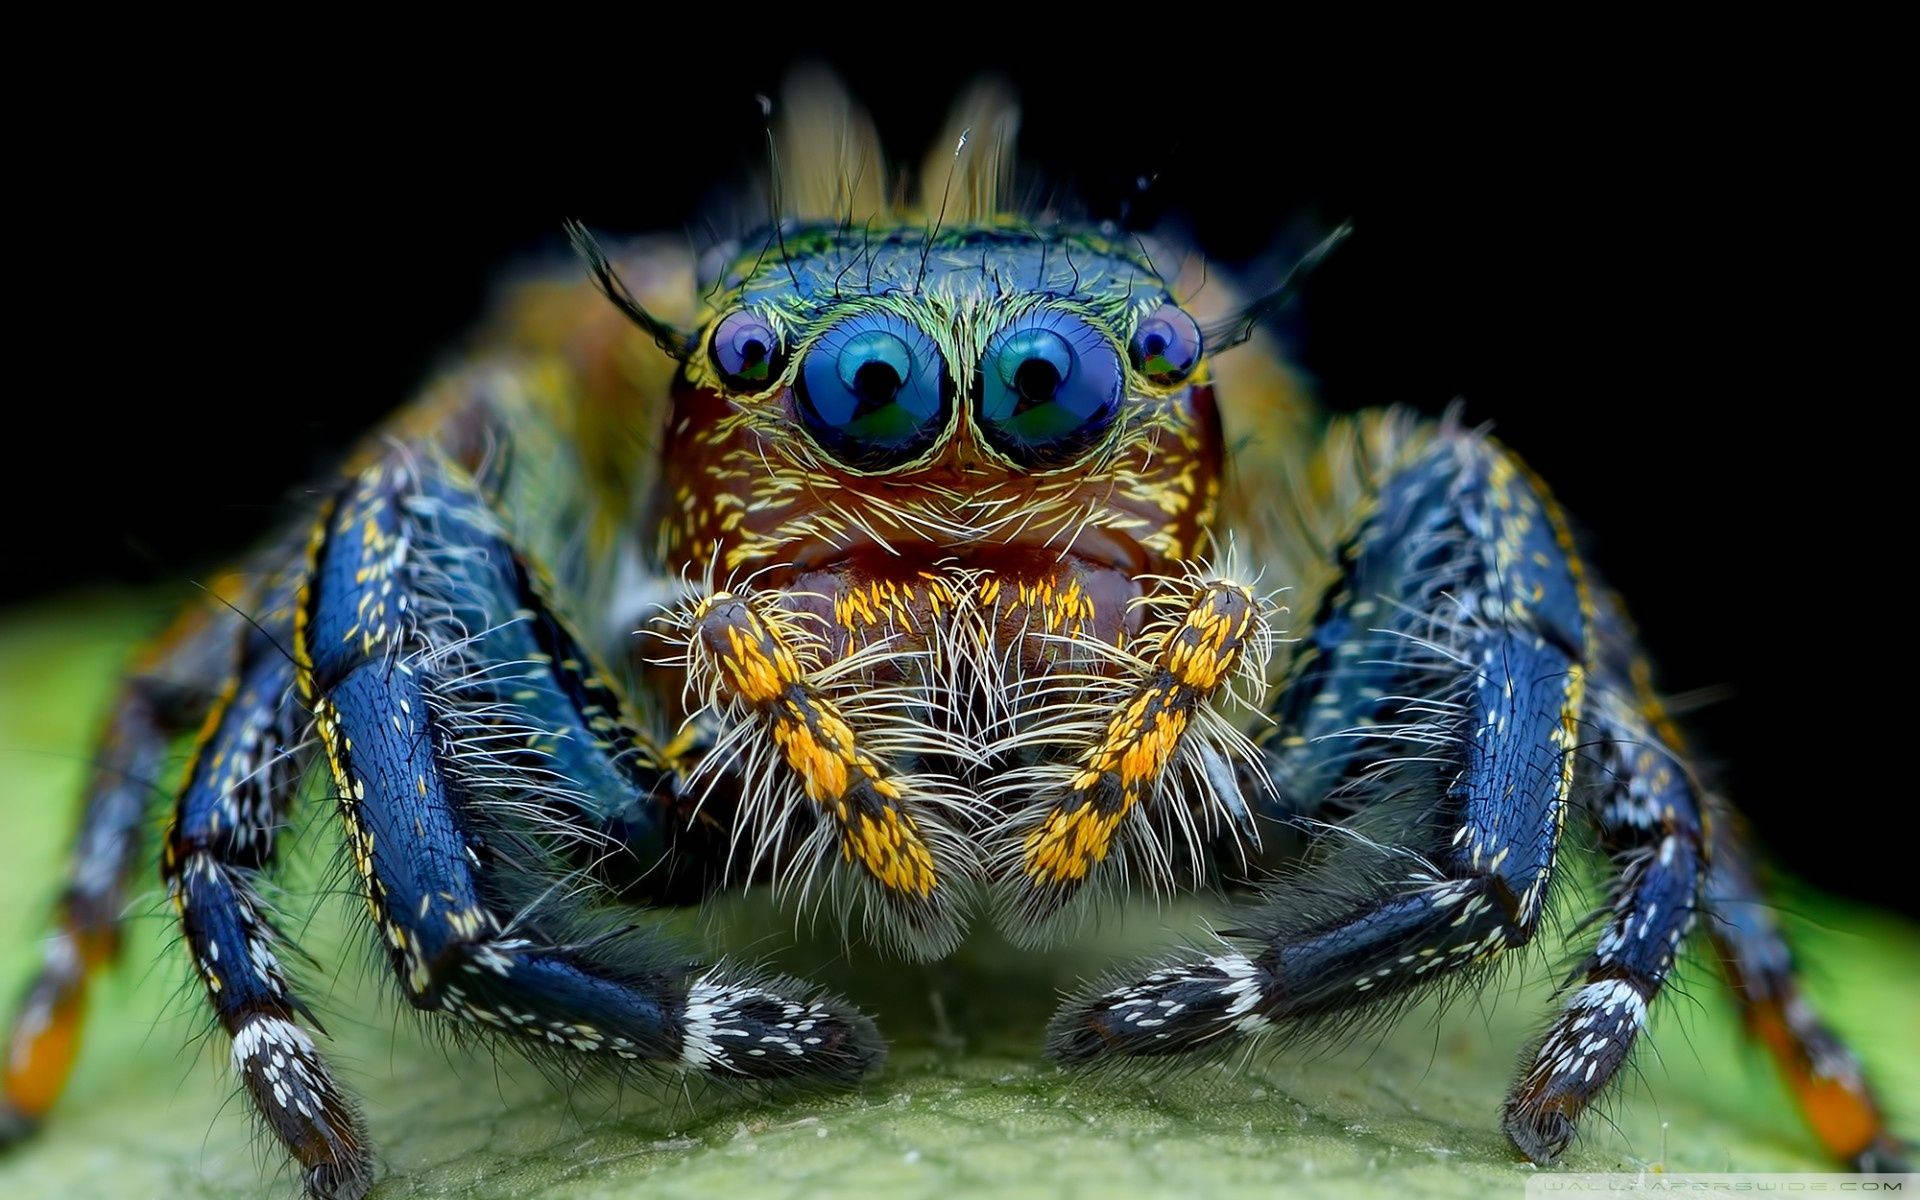 Insect Spider With Eyelashes Wallpaper